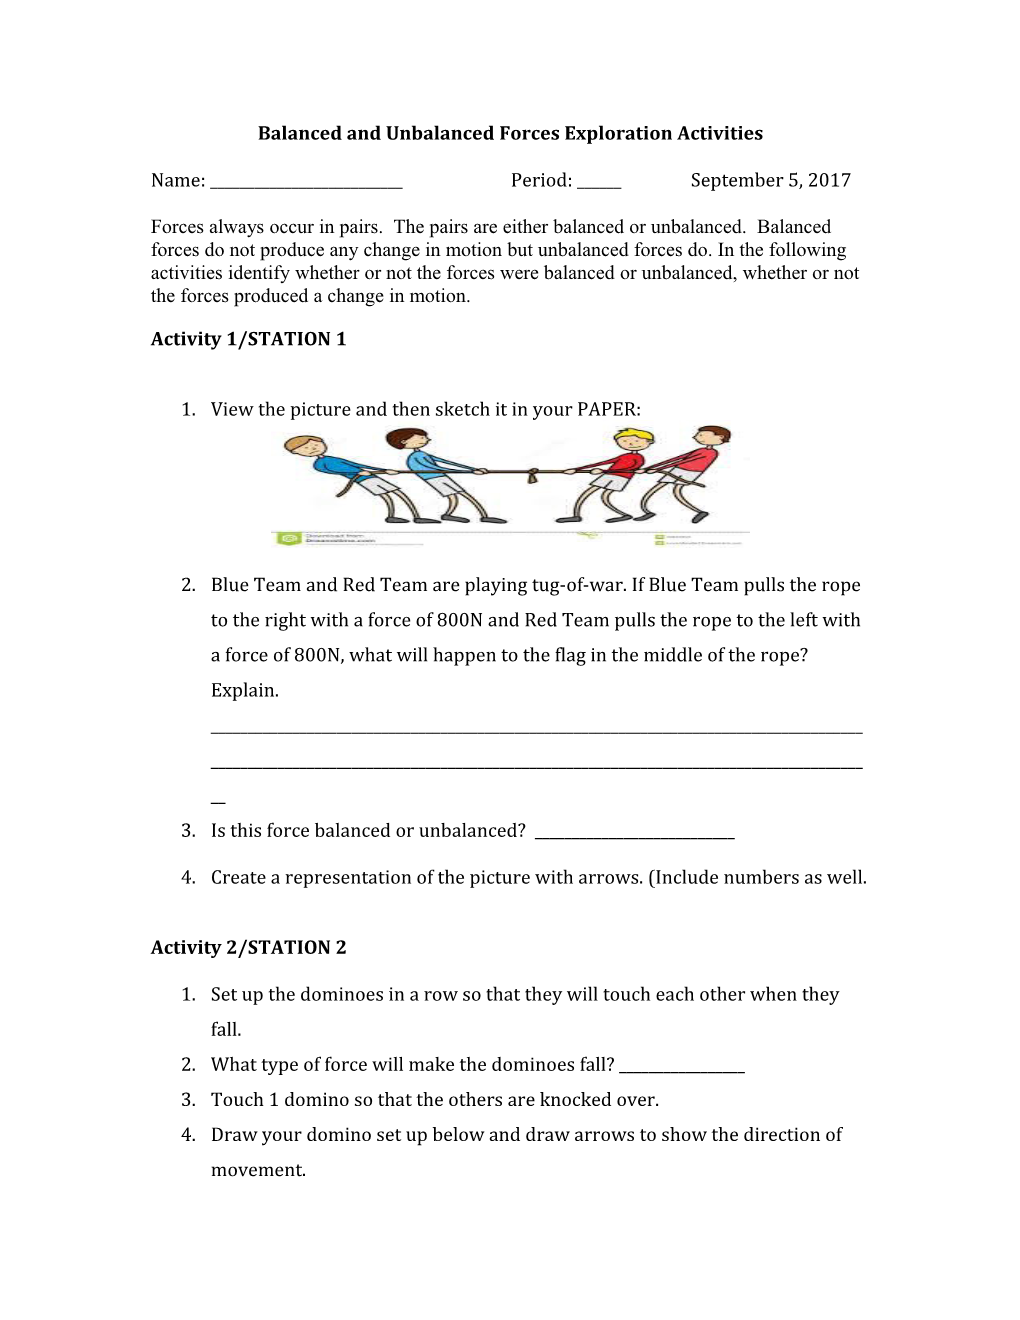 Balanced and Unbalanced Forces Exploration Activities